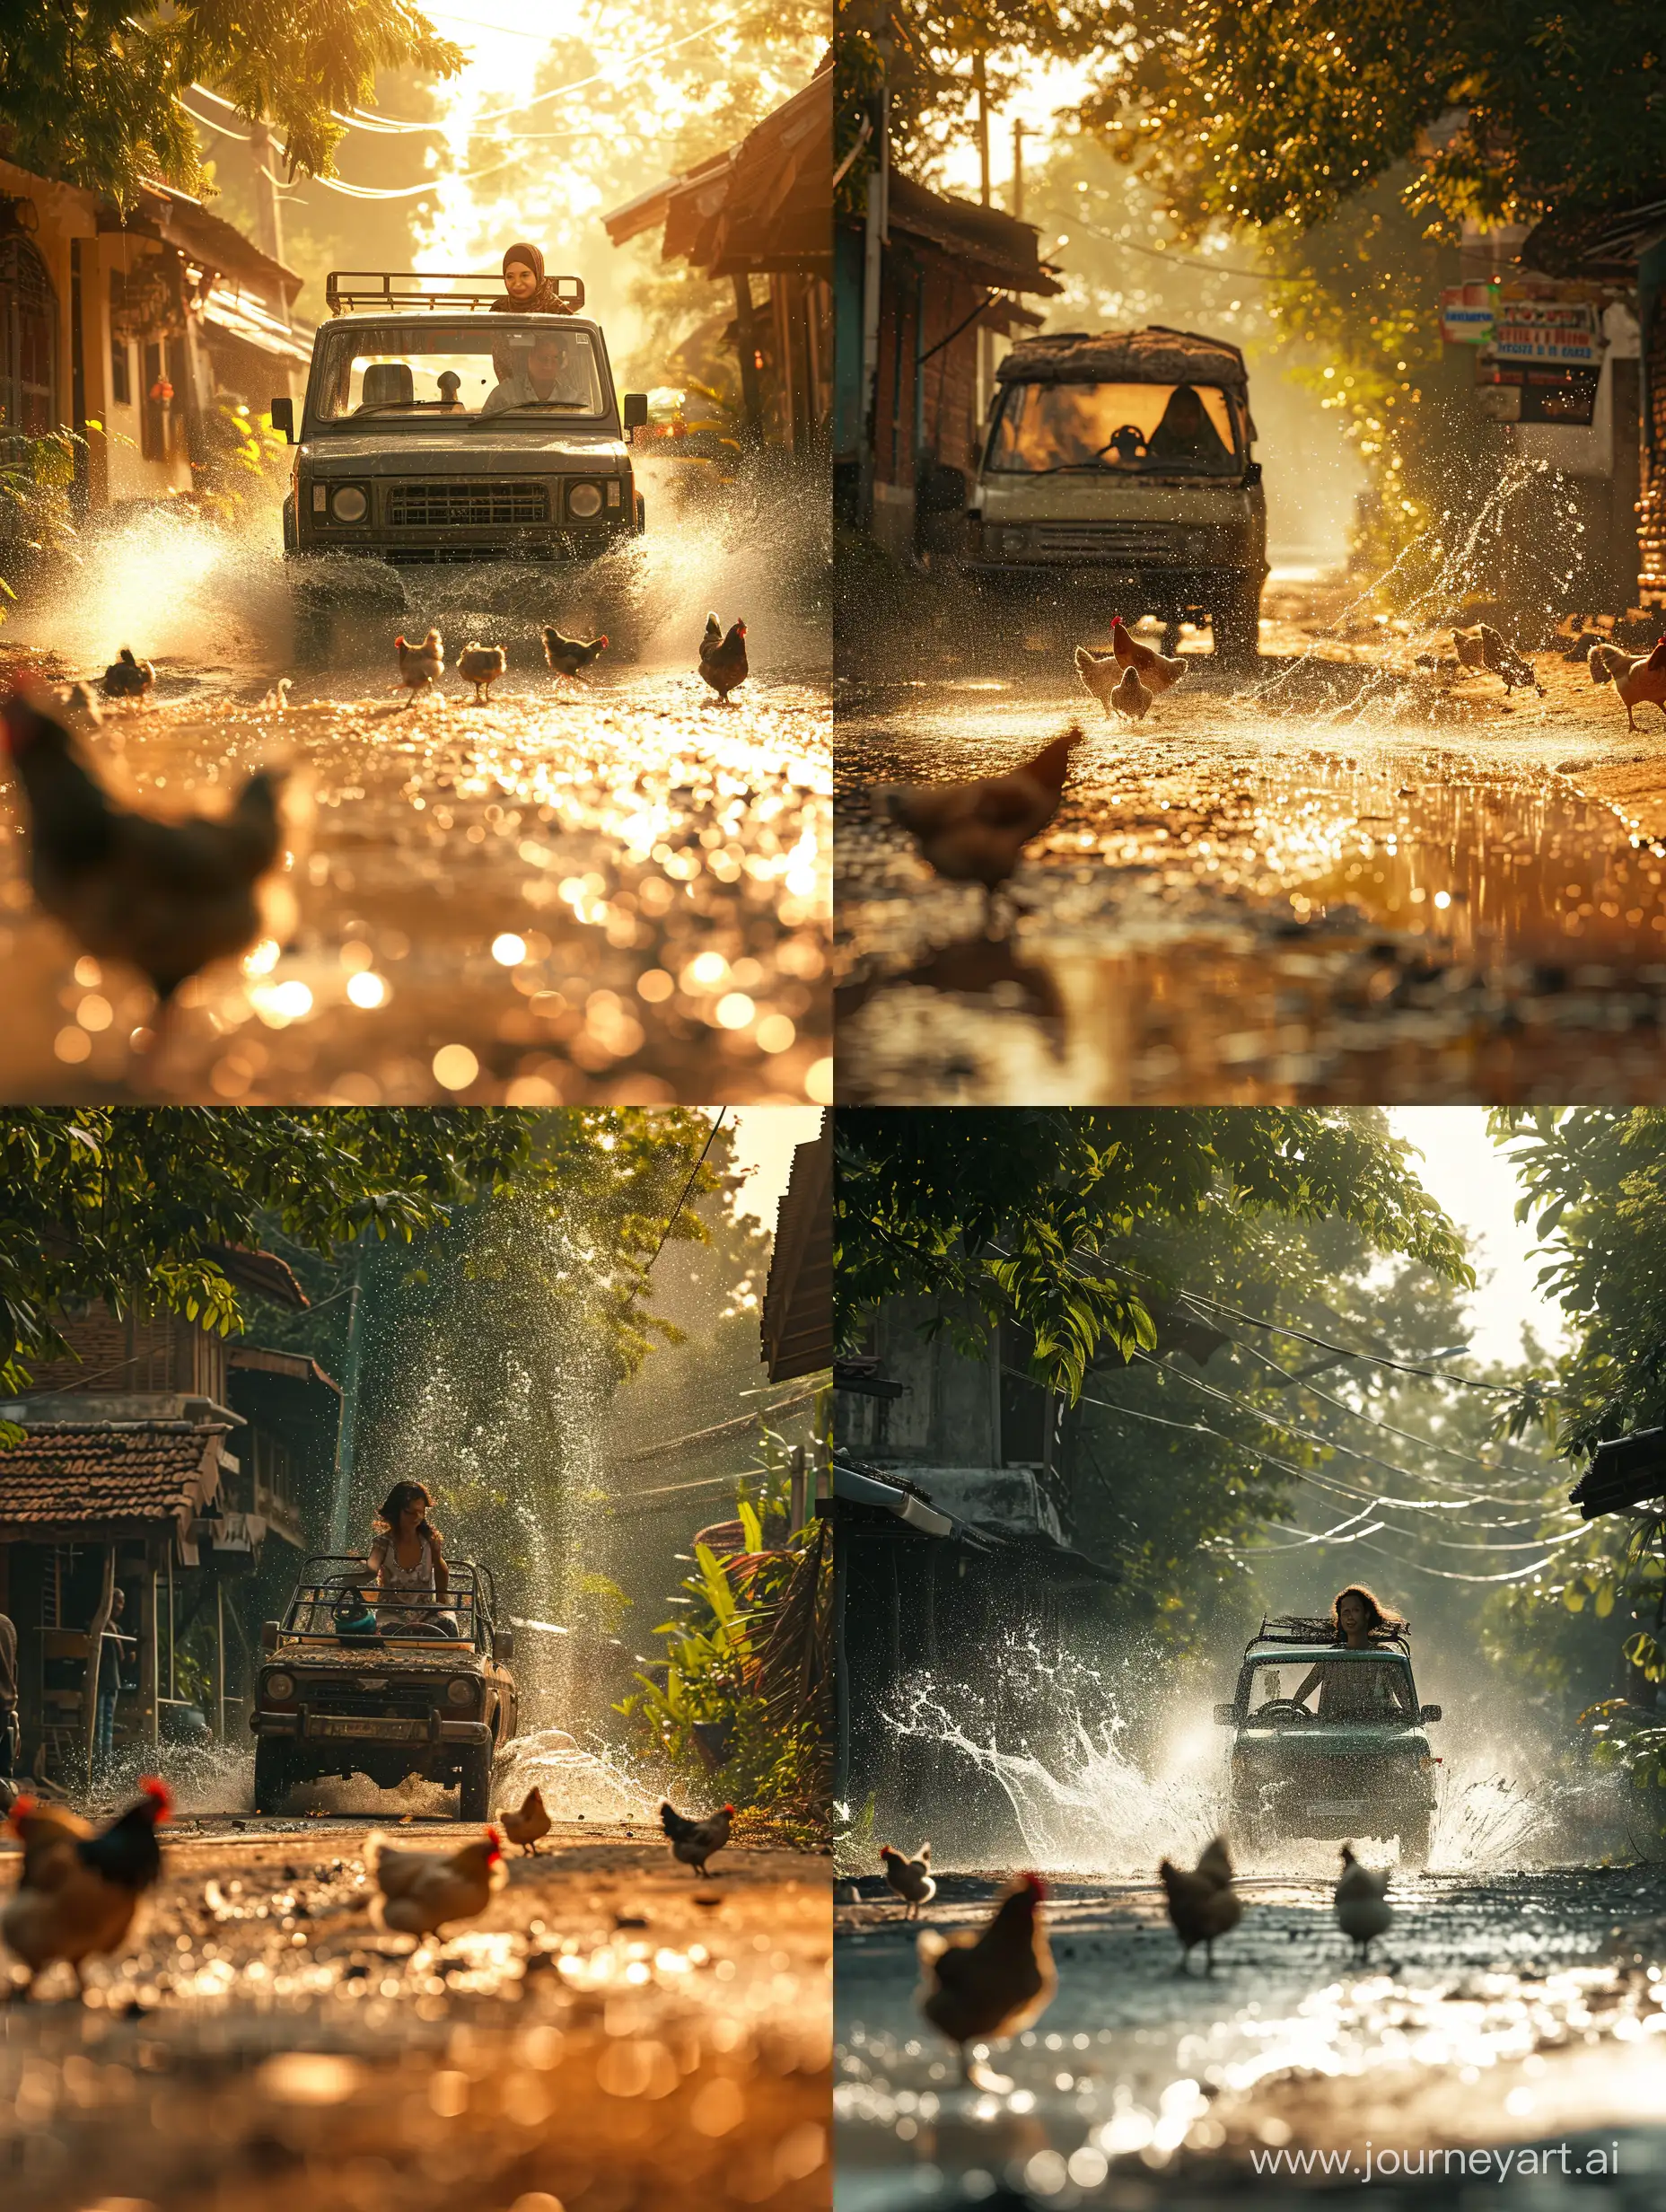 Morning-Ride-Malay-Woman-Driving-Convertible-Car-Through-Village-with-Chickens